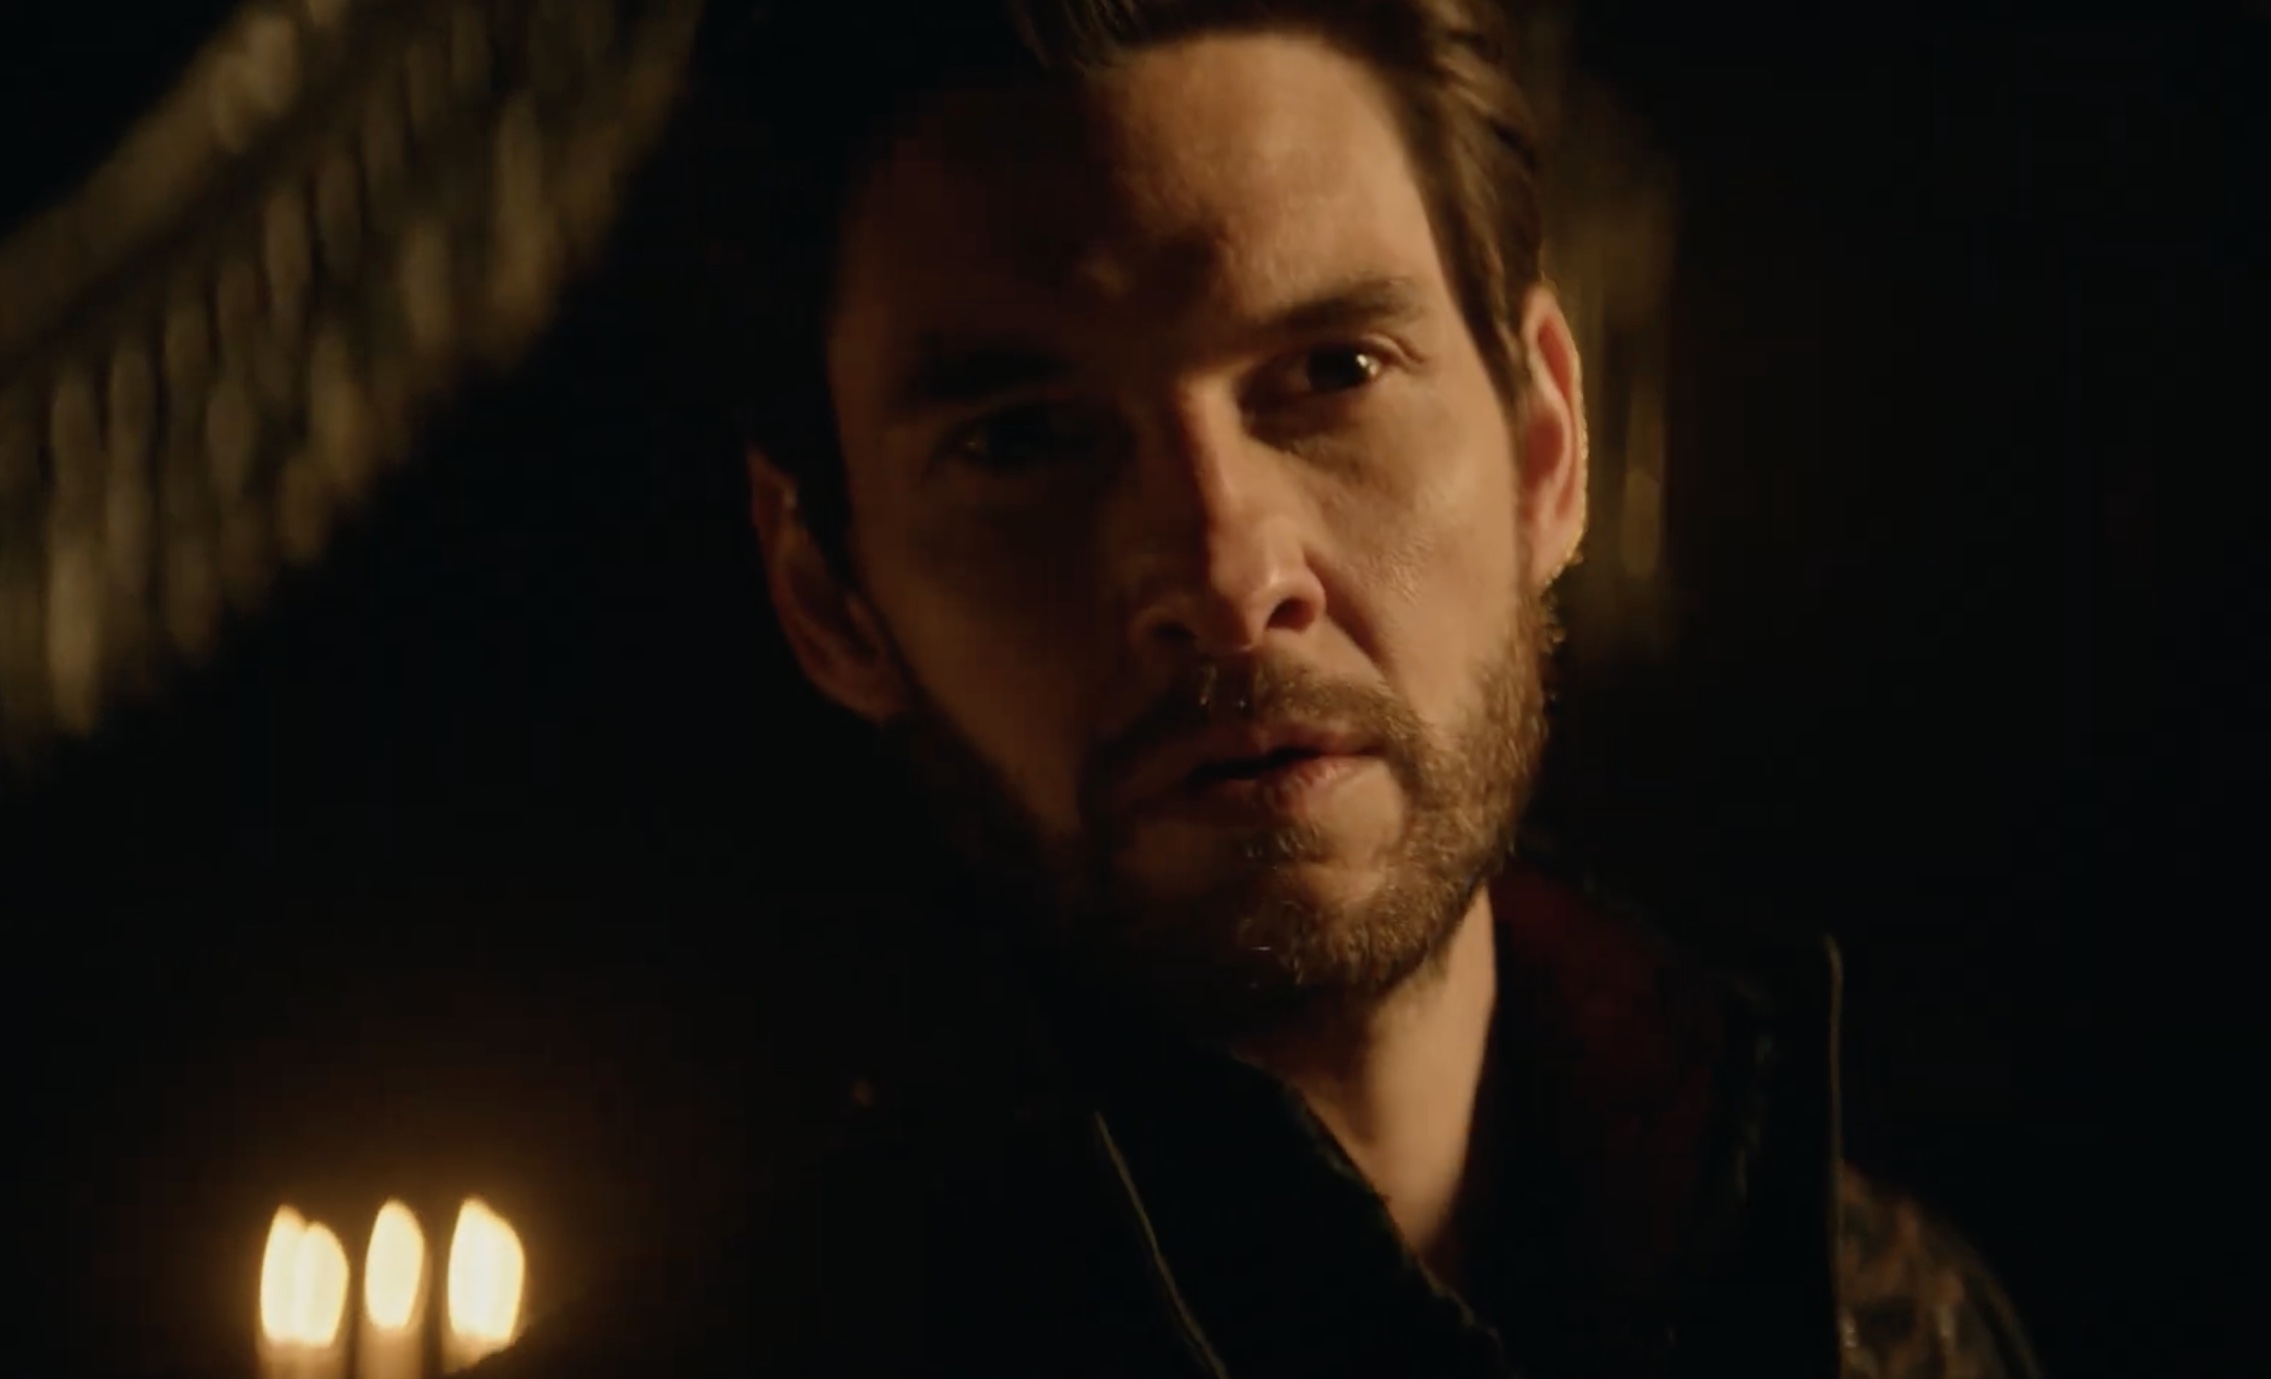 Ben Barnes doing that sexy mouth slightly open gaze things surrounded by candles in a dark room in Shadow and Bone season 2